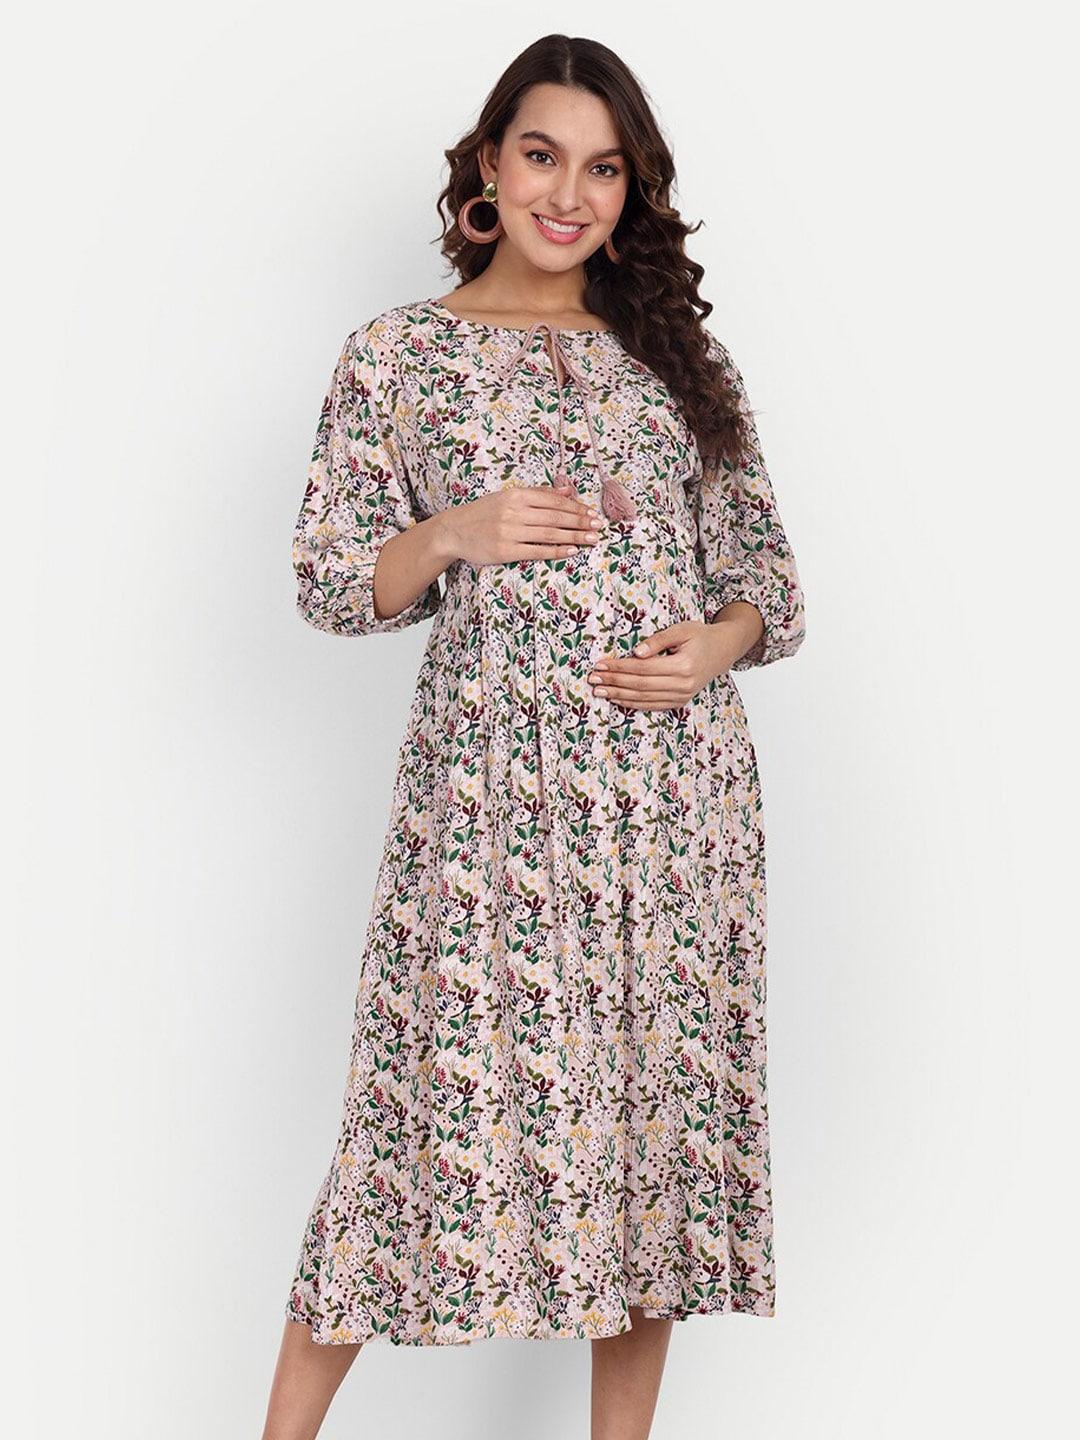 aaruvi-ruchi-verma-tie-up-neck-floral-printed-midi-fit-and-flare-maternity-dress